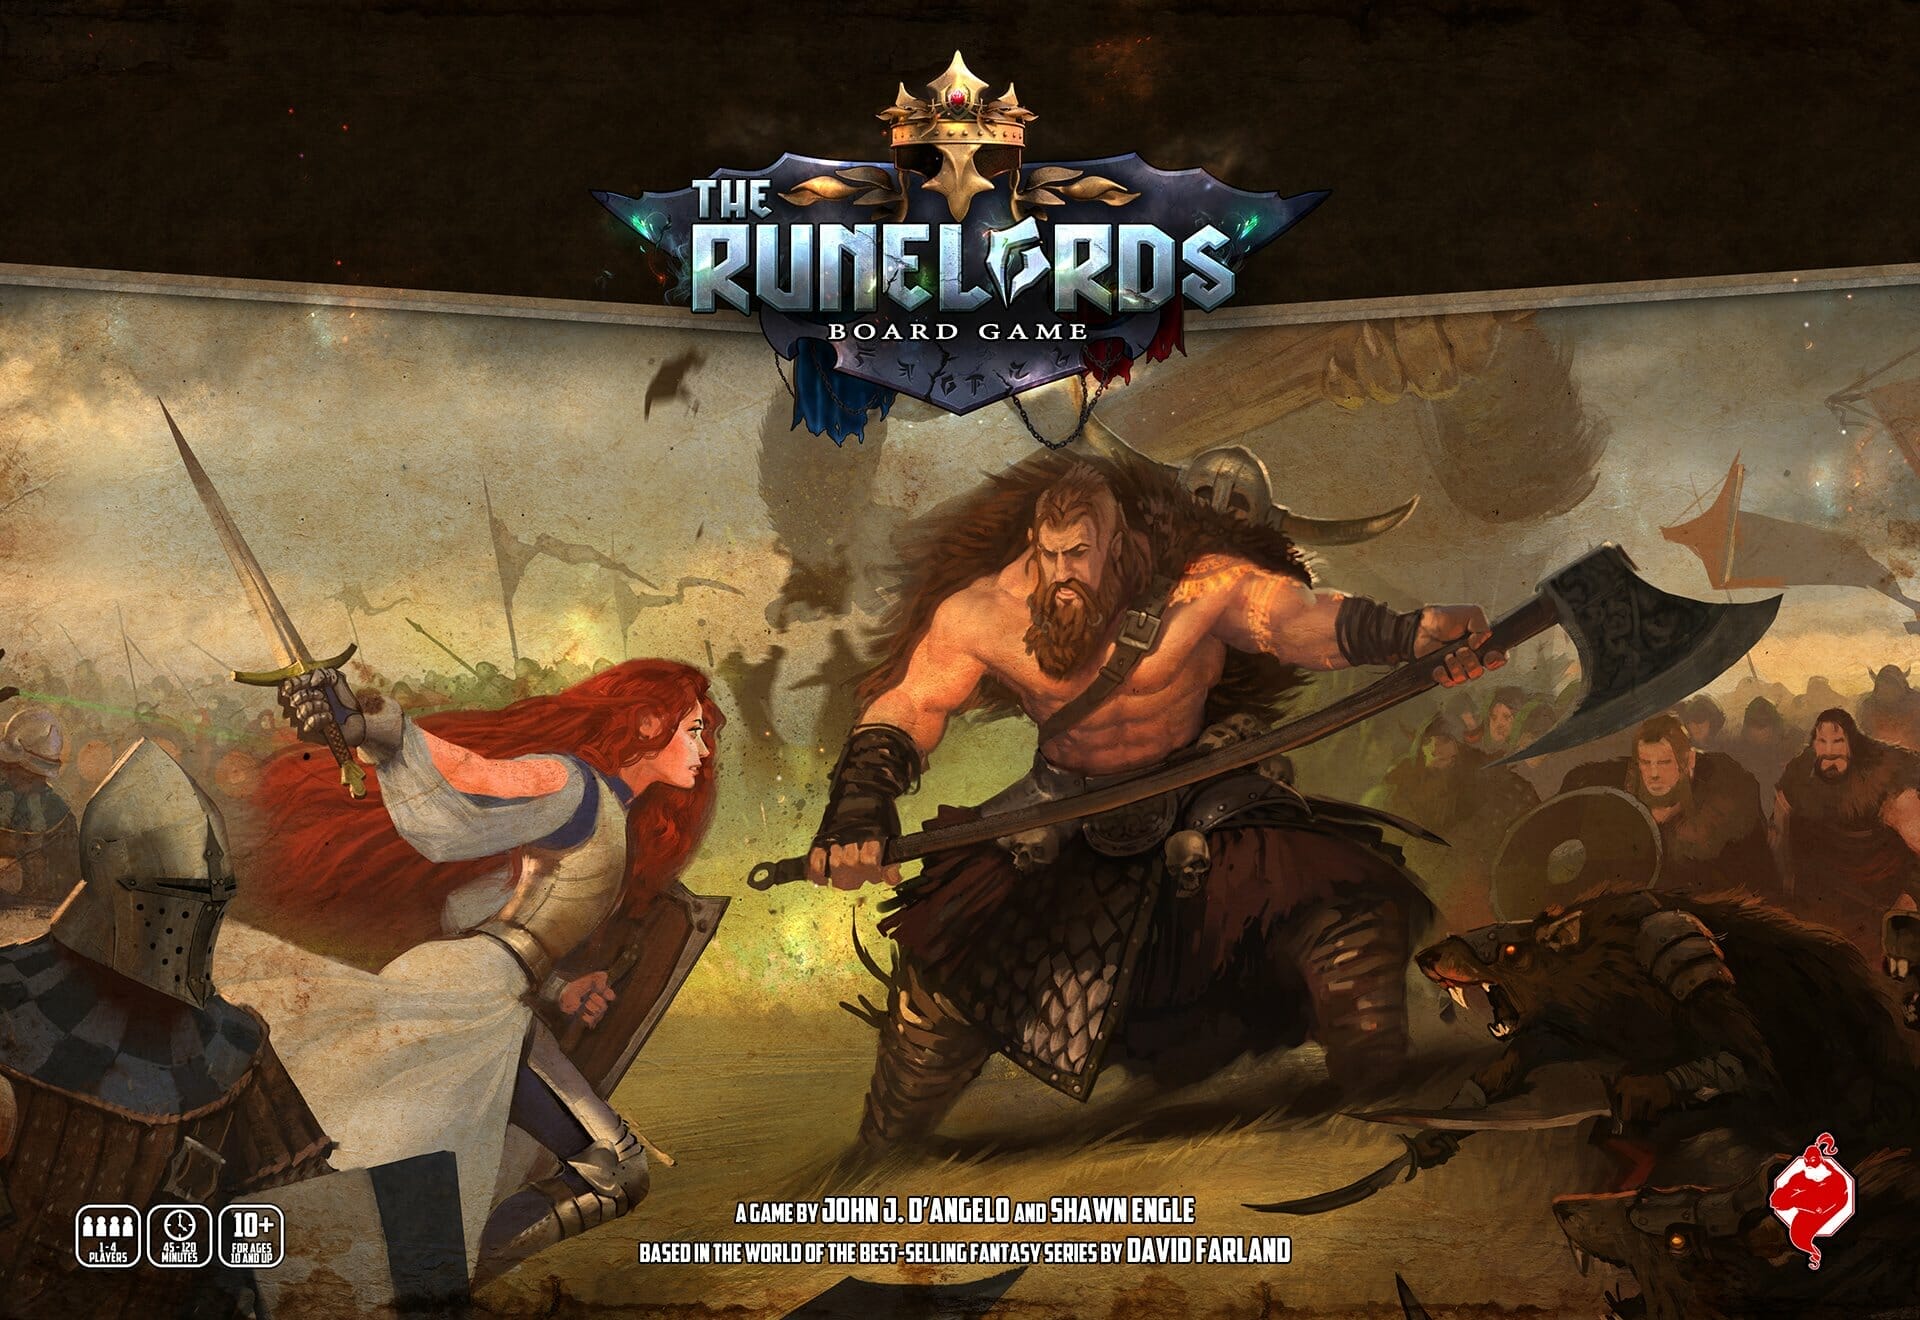 The Runelords board game